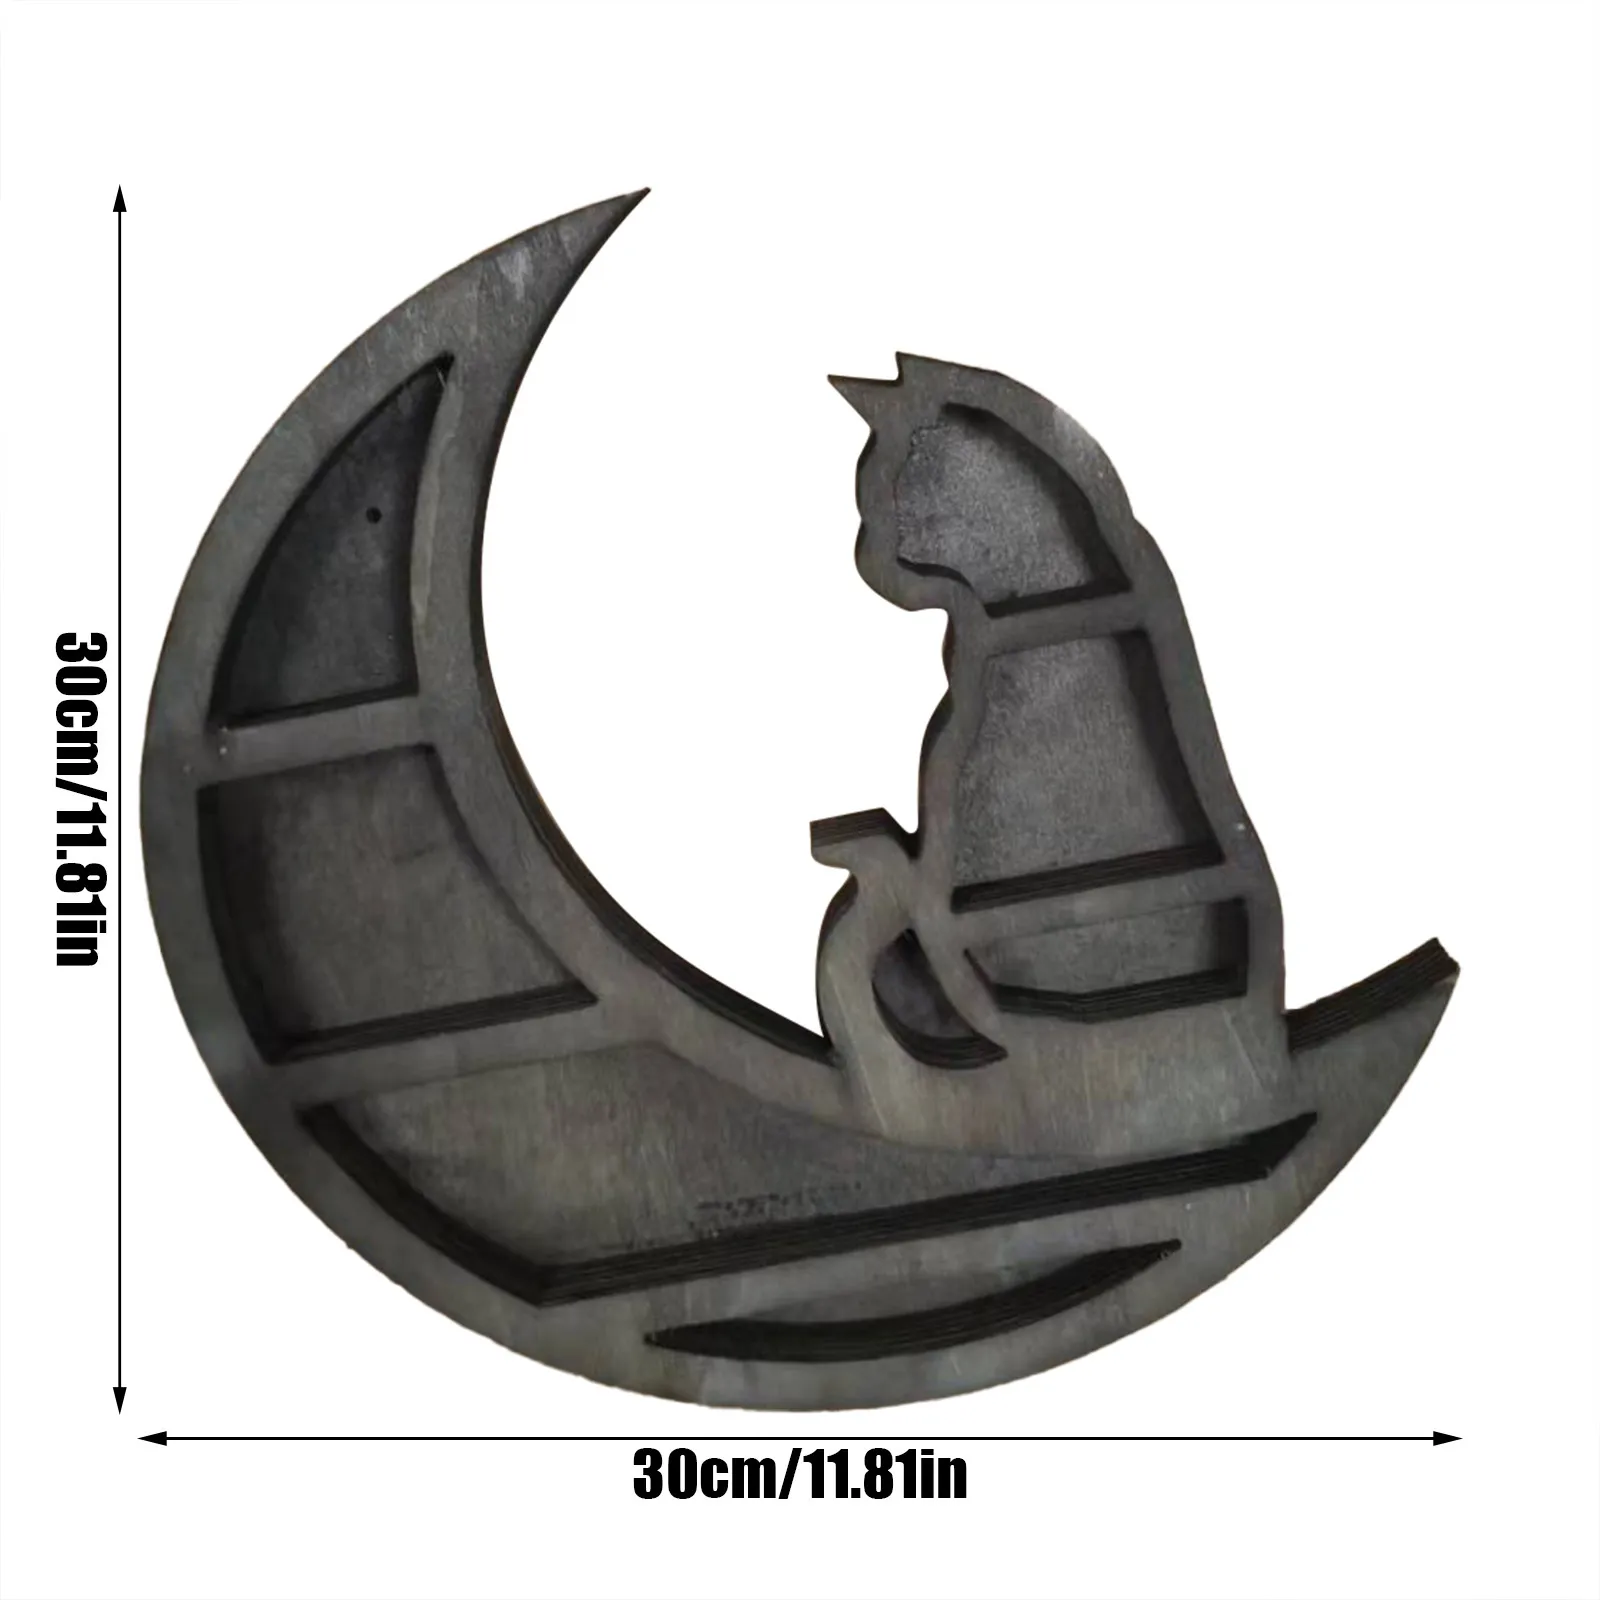 Cat and Moon Wooden Shelf for home decor14